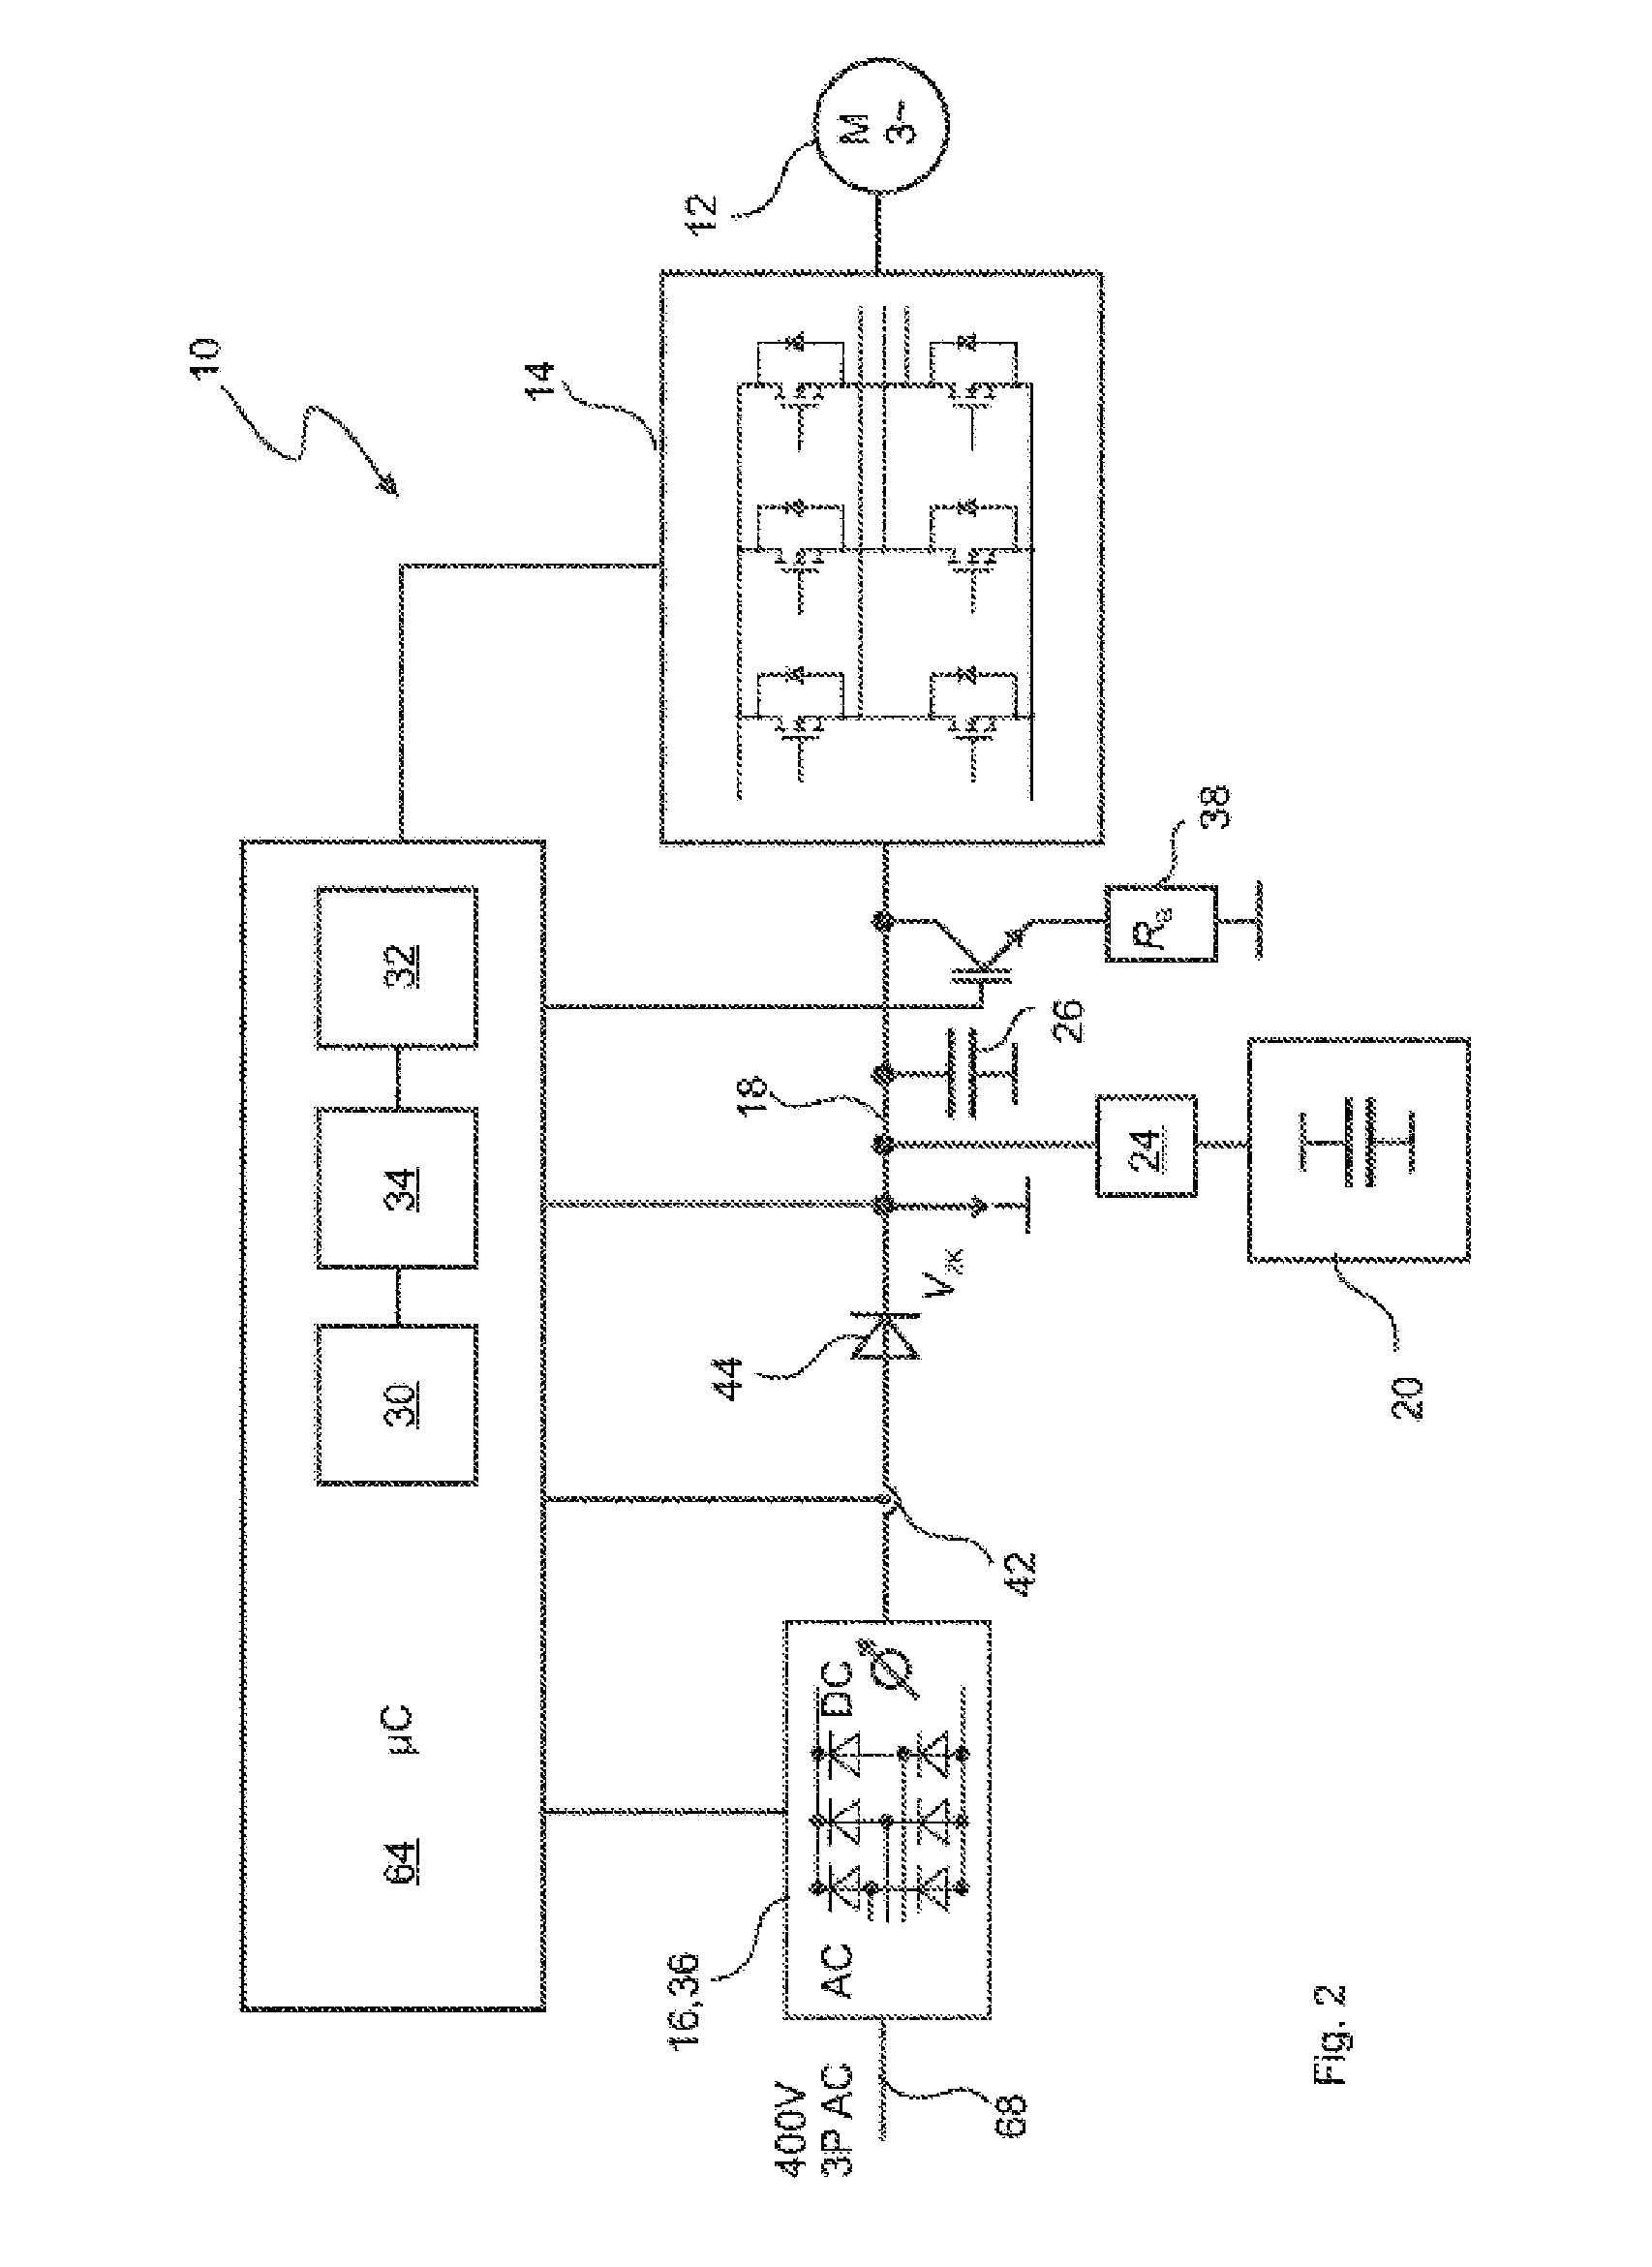 Pitch drive device capable of emergency operation for a wind or water power plant